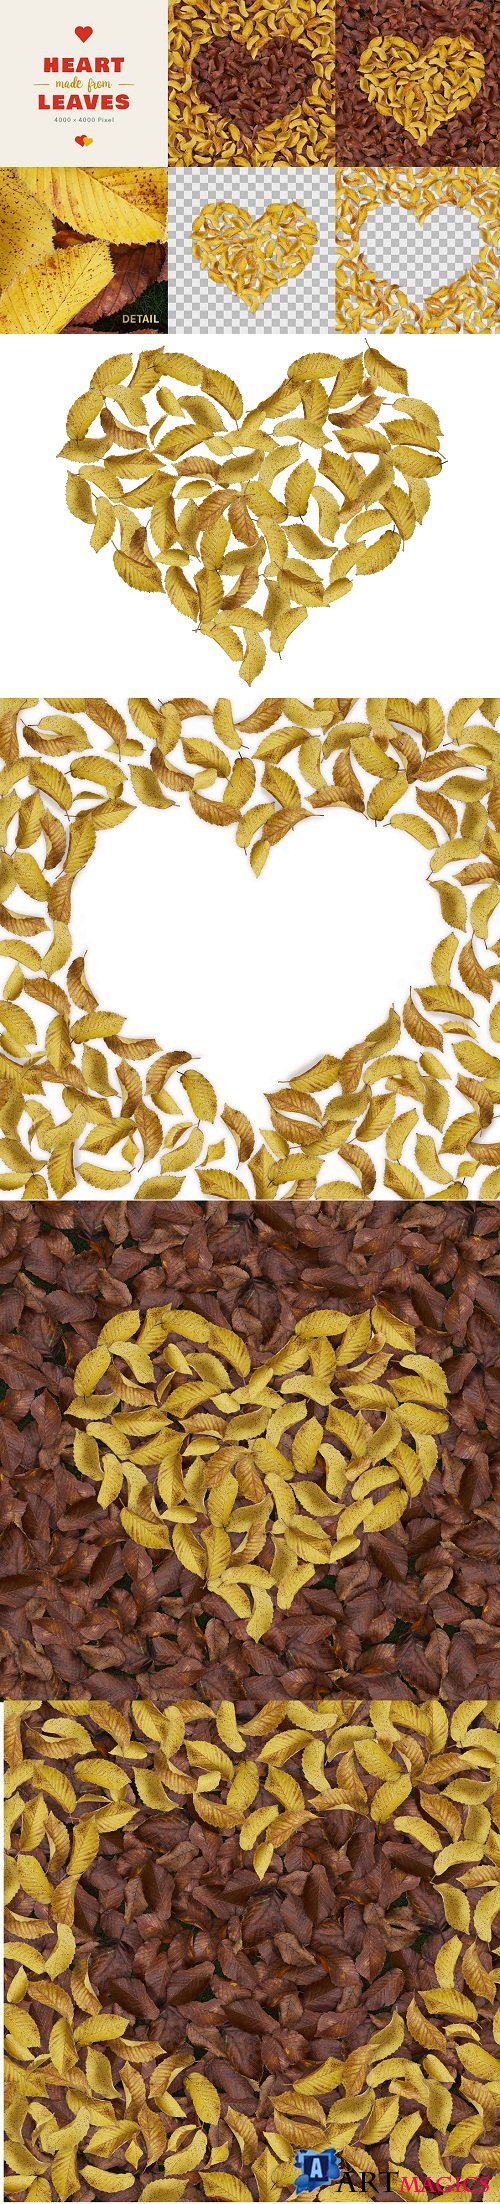 Heart Made From Leaves